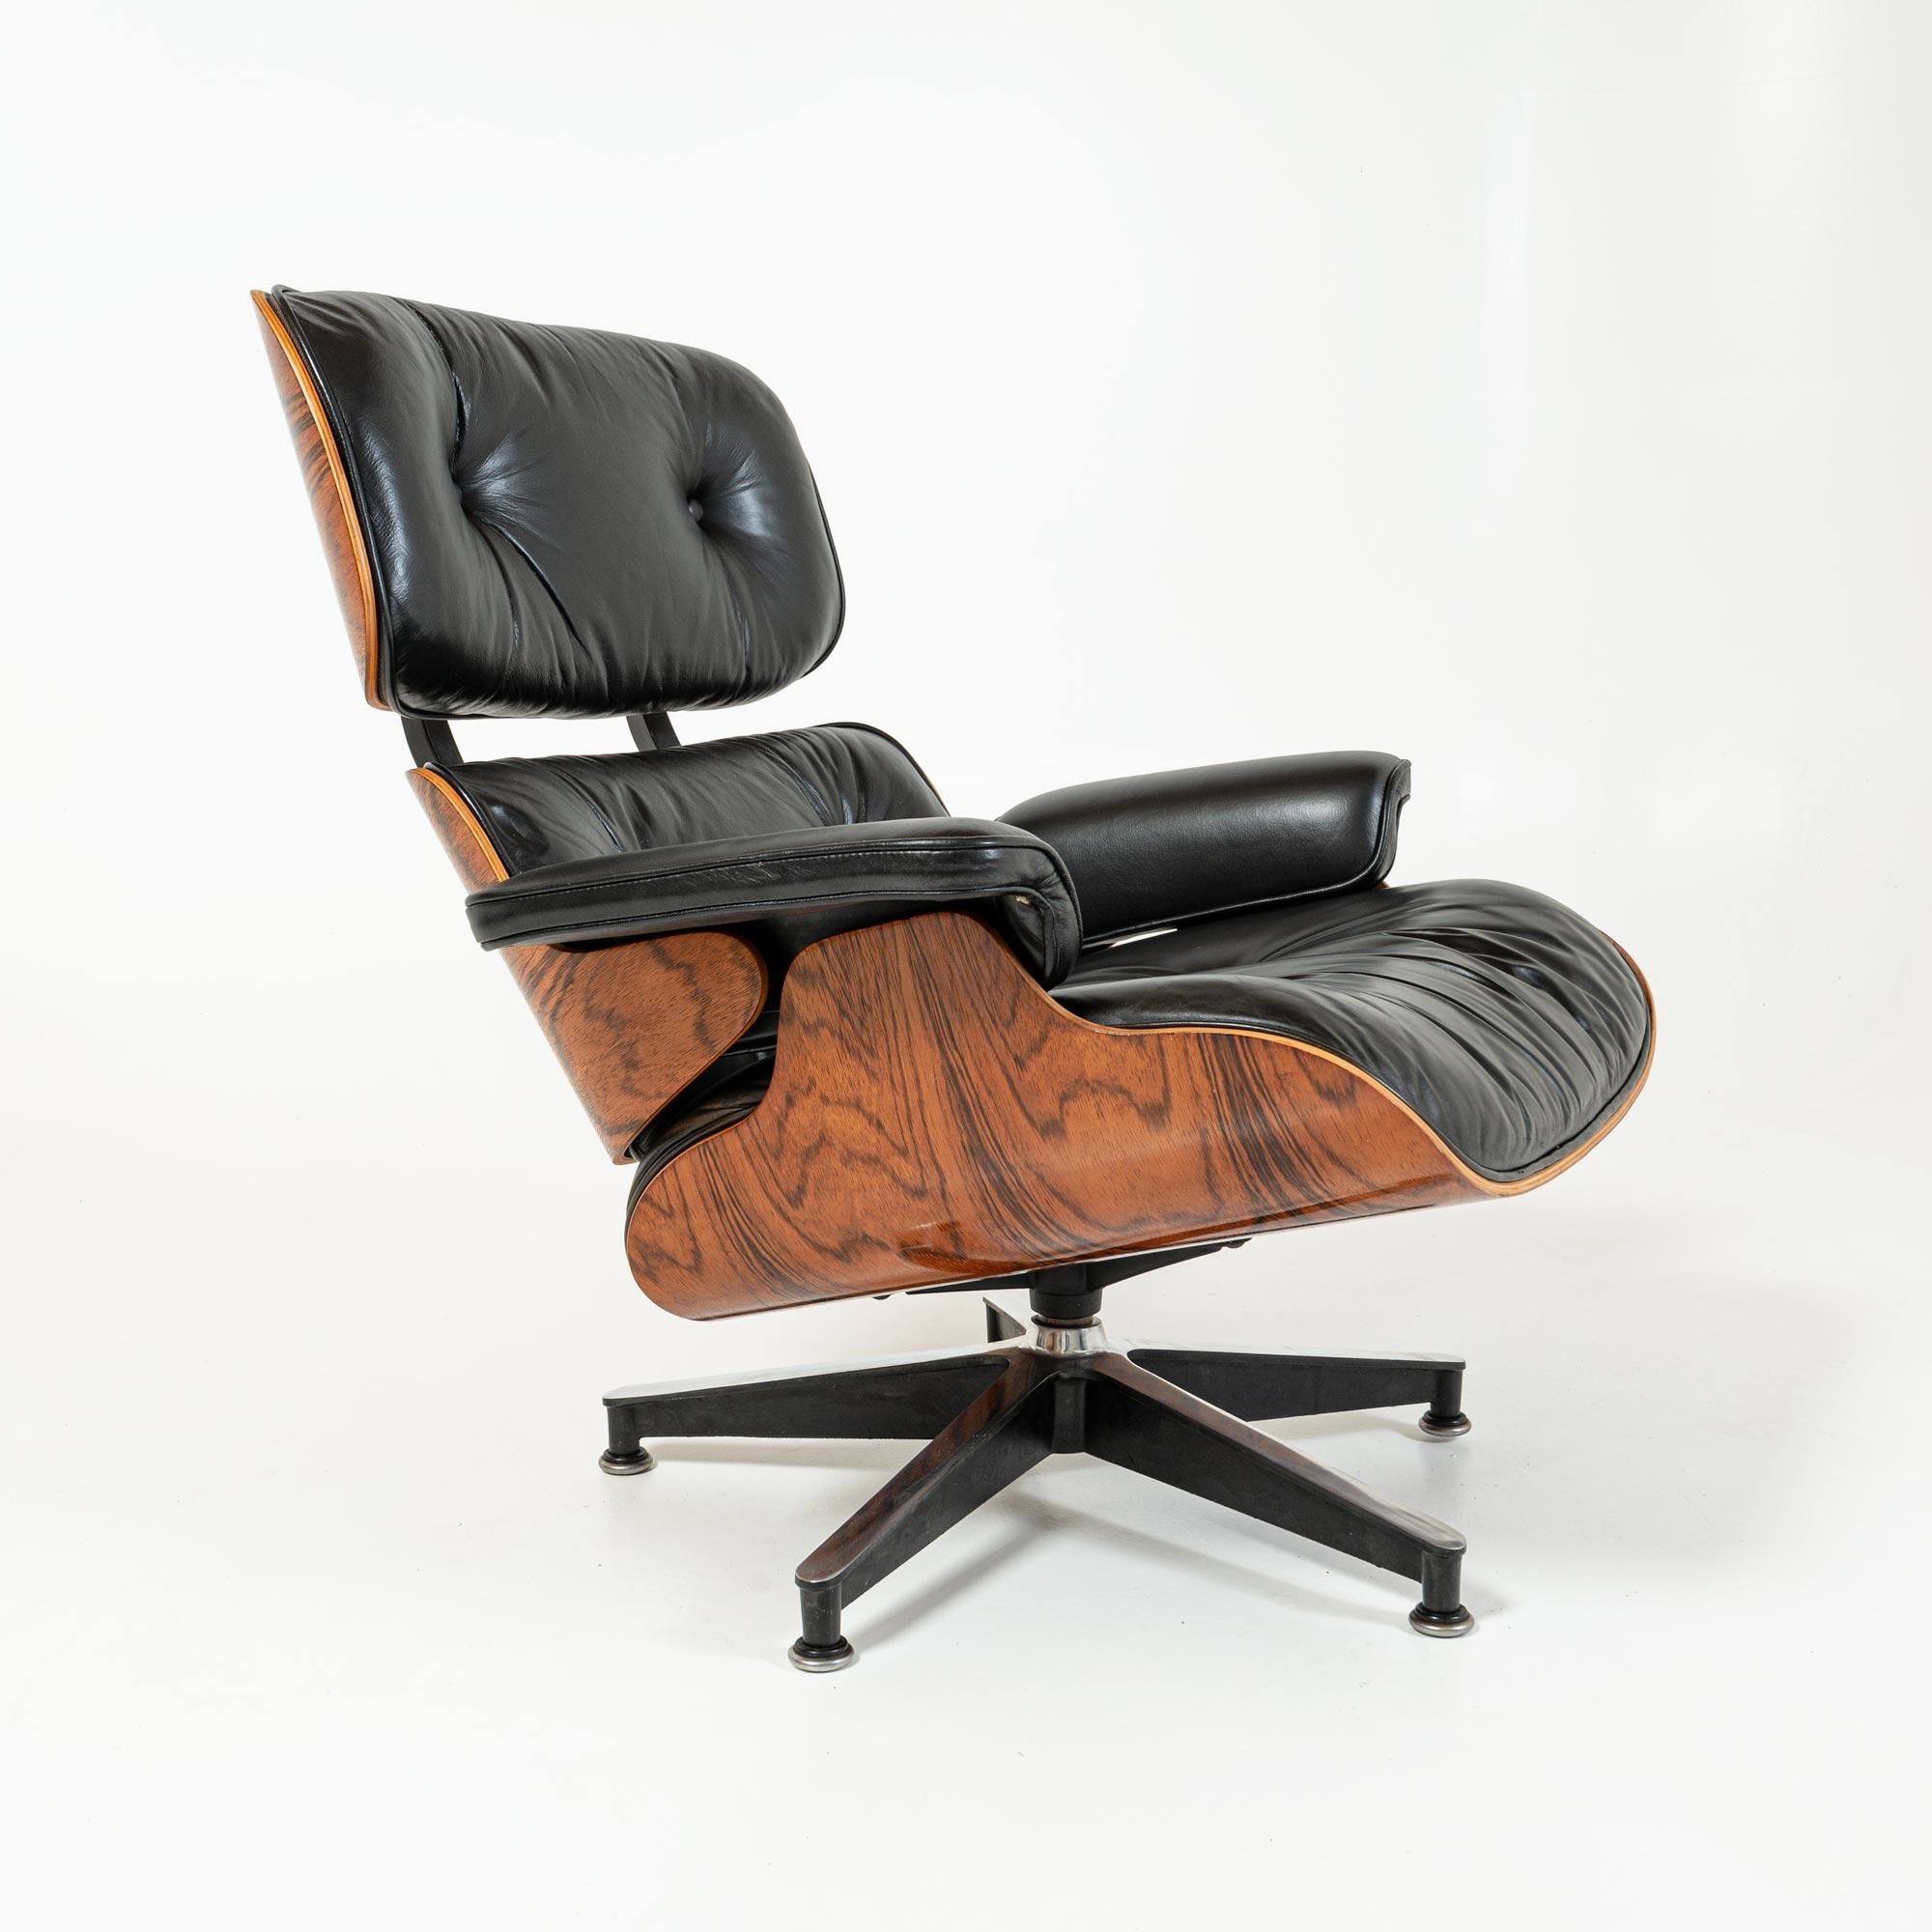 Late 20th Century Restored 3rd Gen Eames Lounge Chair and Ottoman in Original black Leather